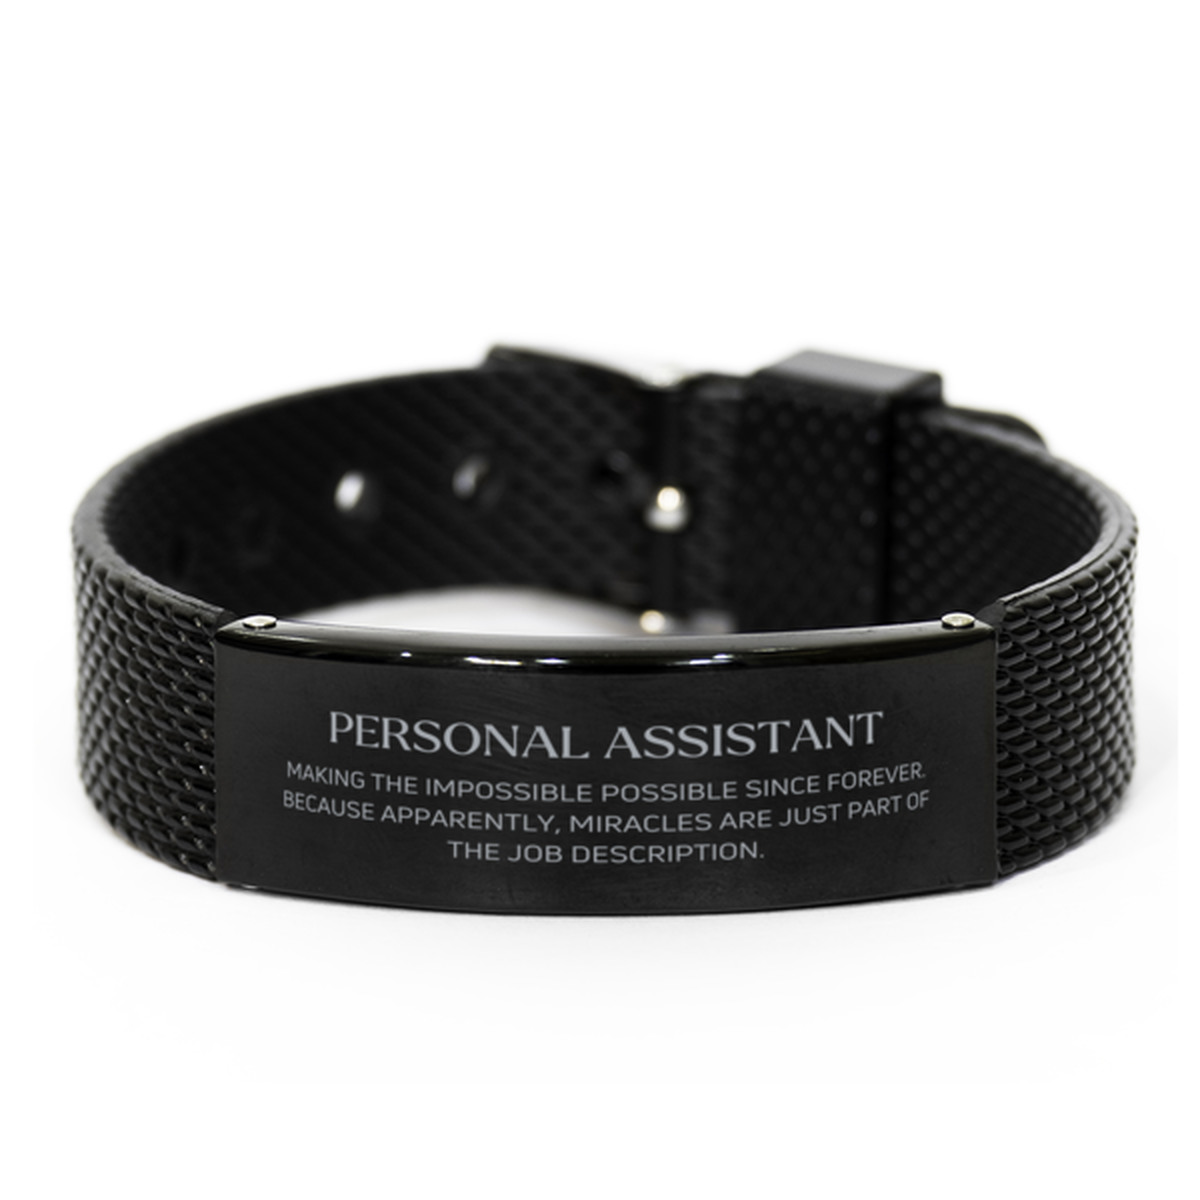 Funny Personal Assistant Gifts, Miracles are just part of the job description, Inspirational Birthday Black Shark Mesh Bracelet For Personal Assistant, Men, Women, Coworkers, Friends, Boss